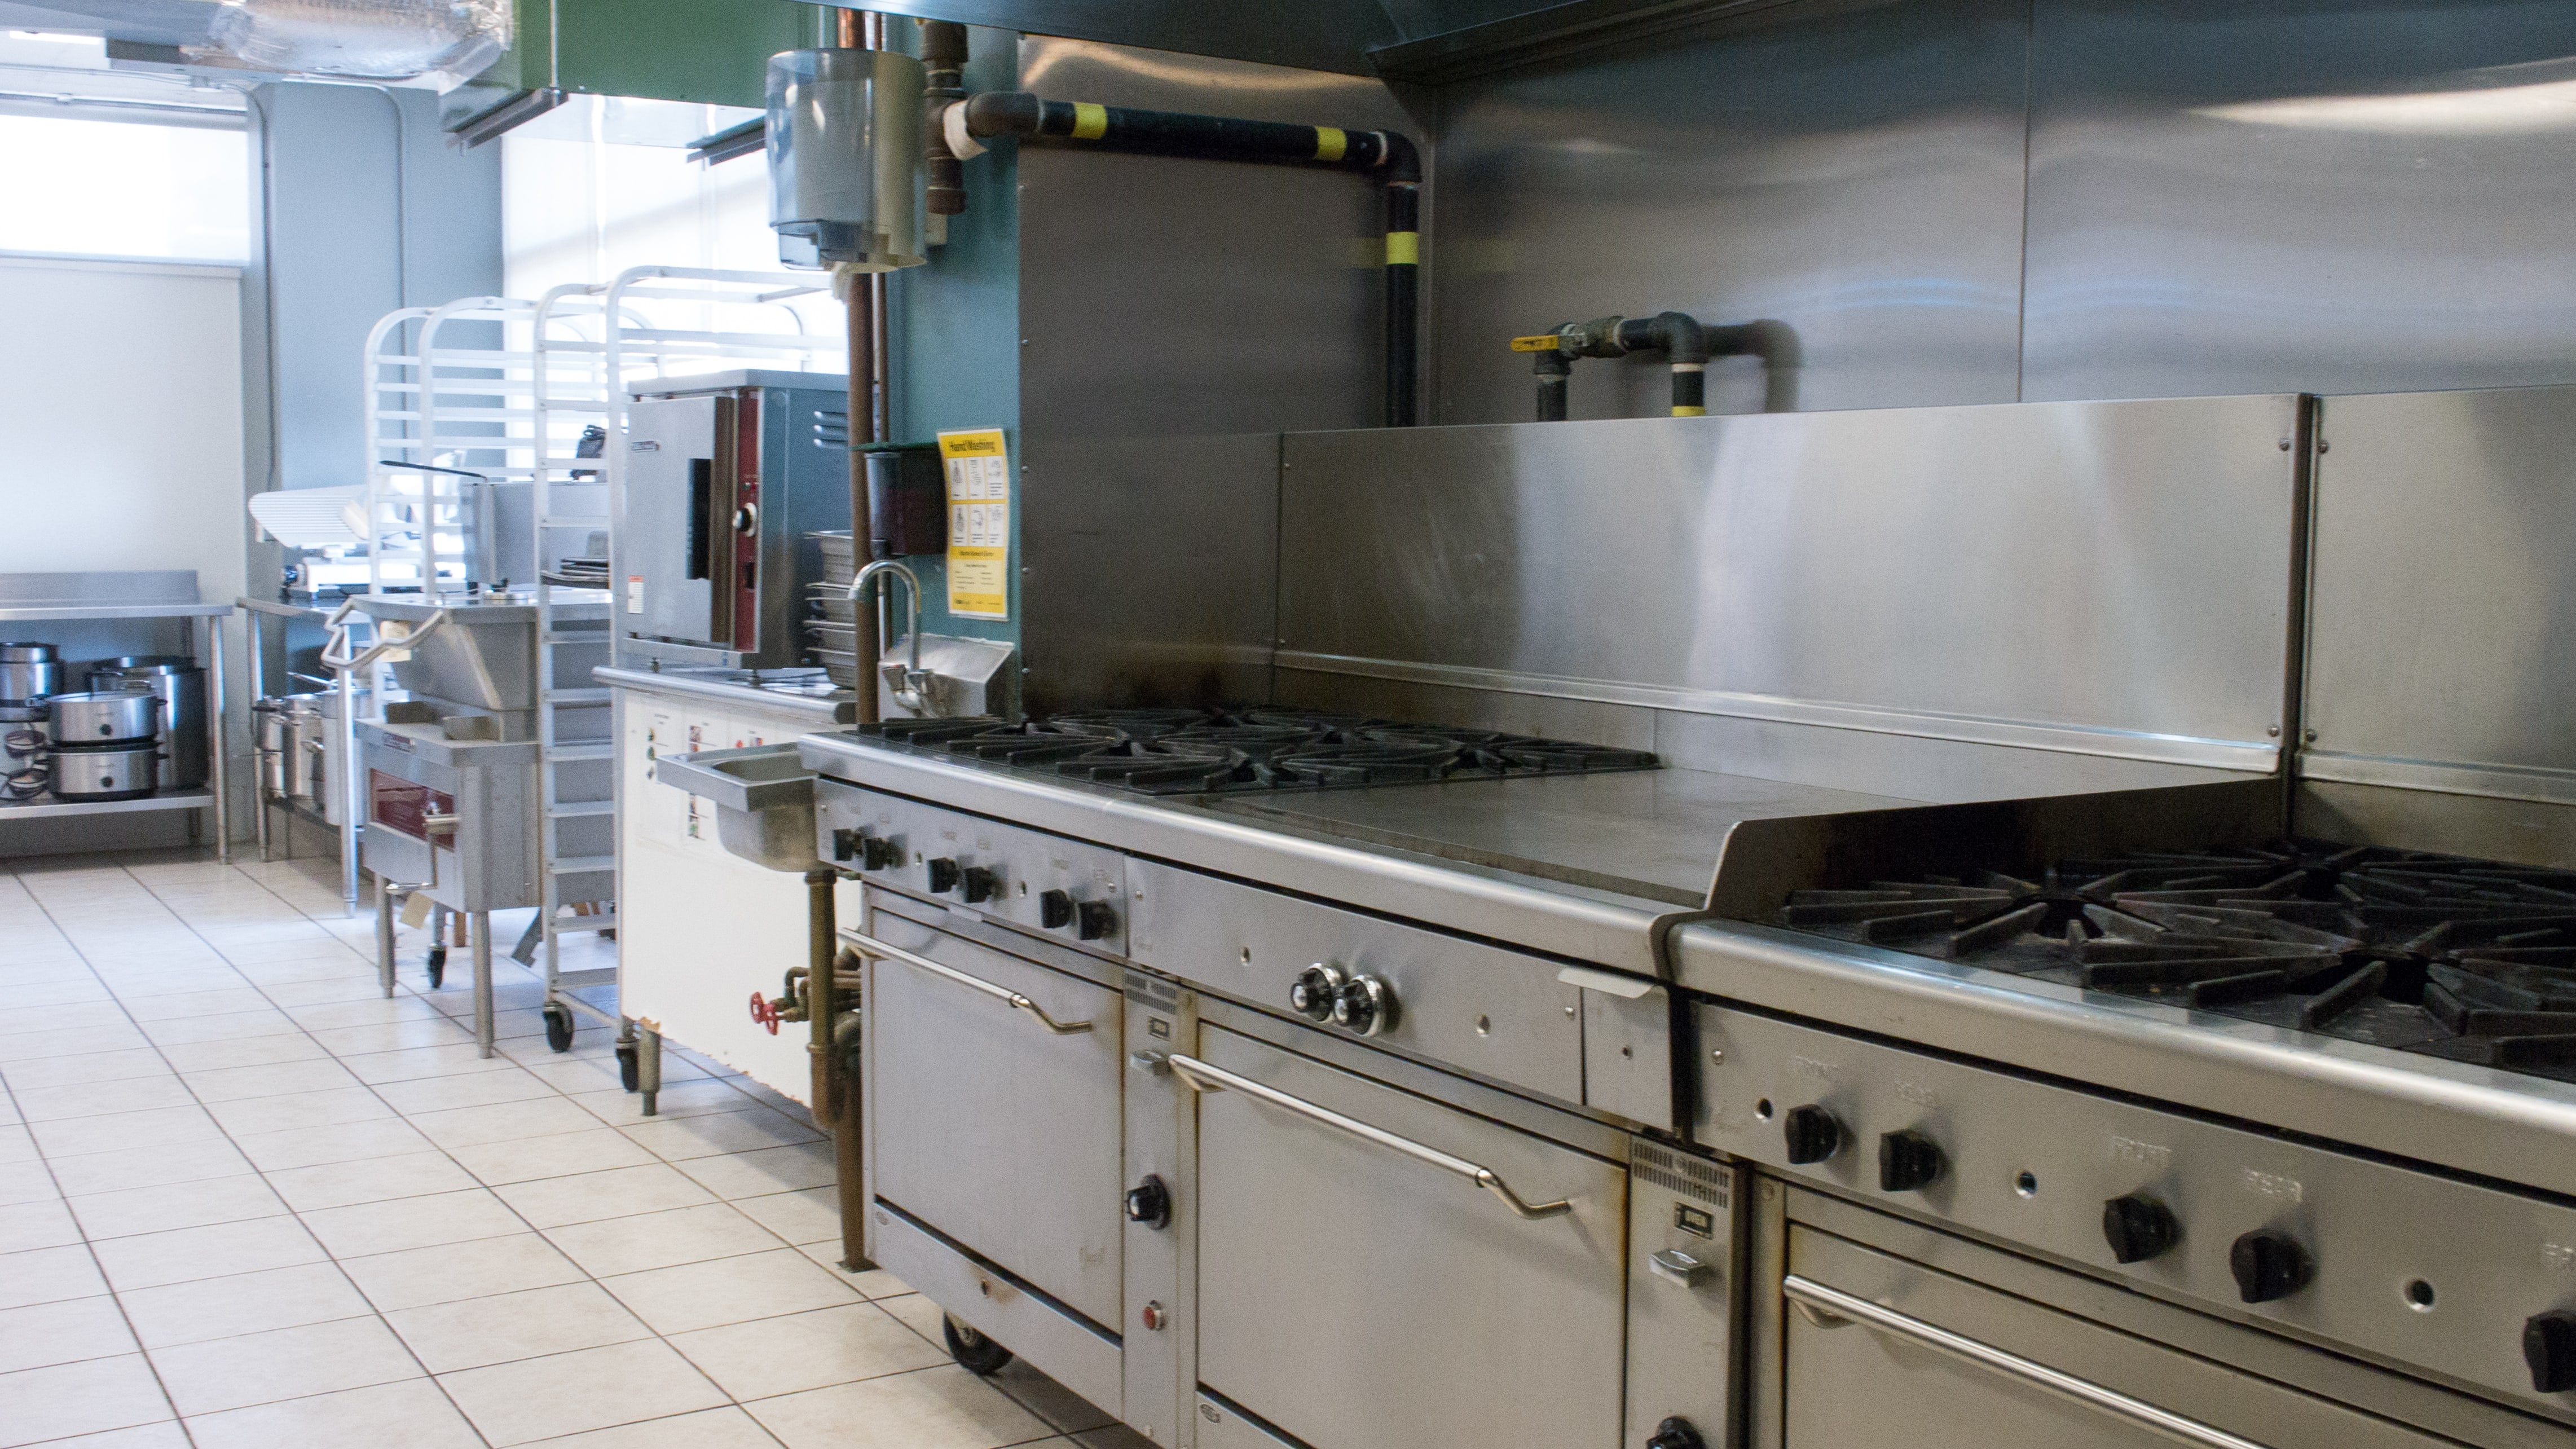 Stoves in the industrial kitchen